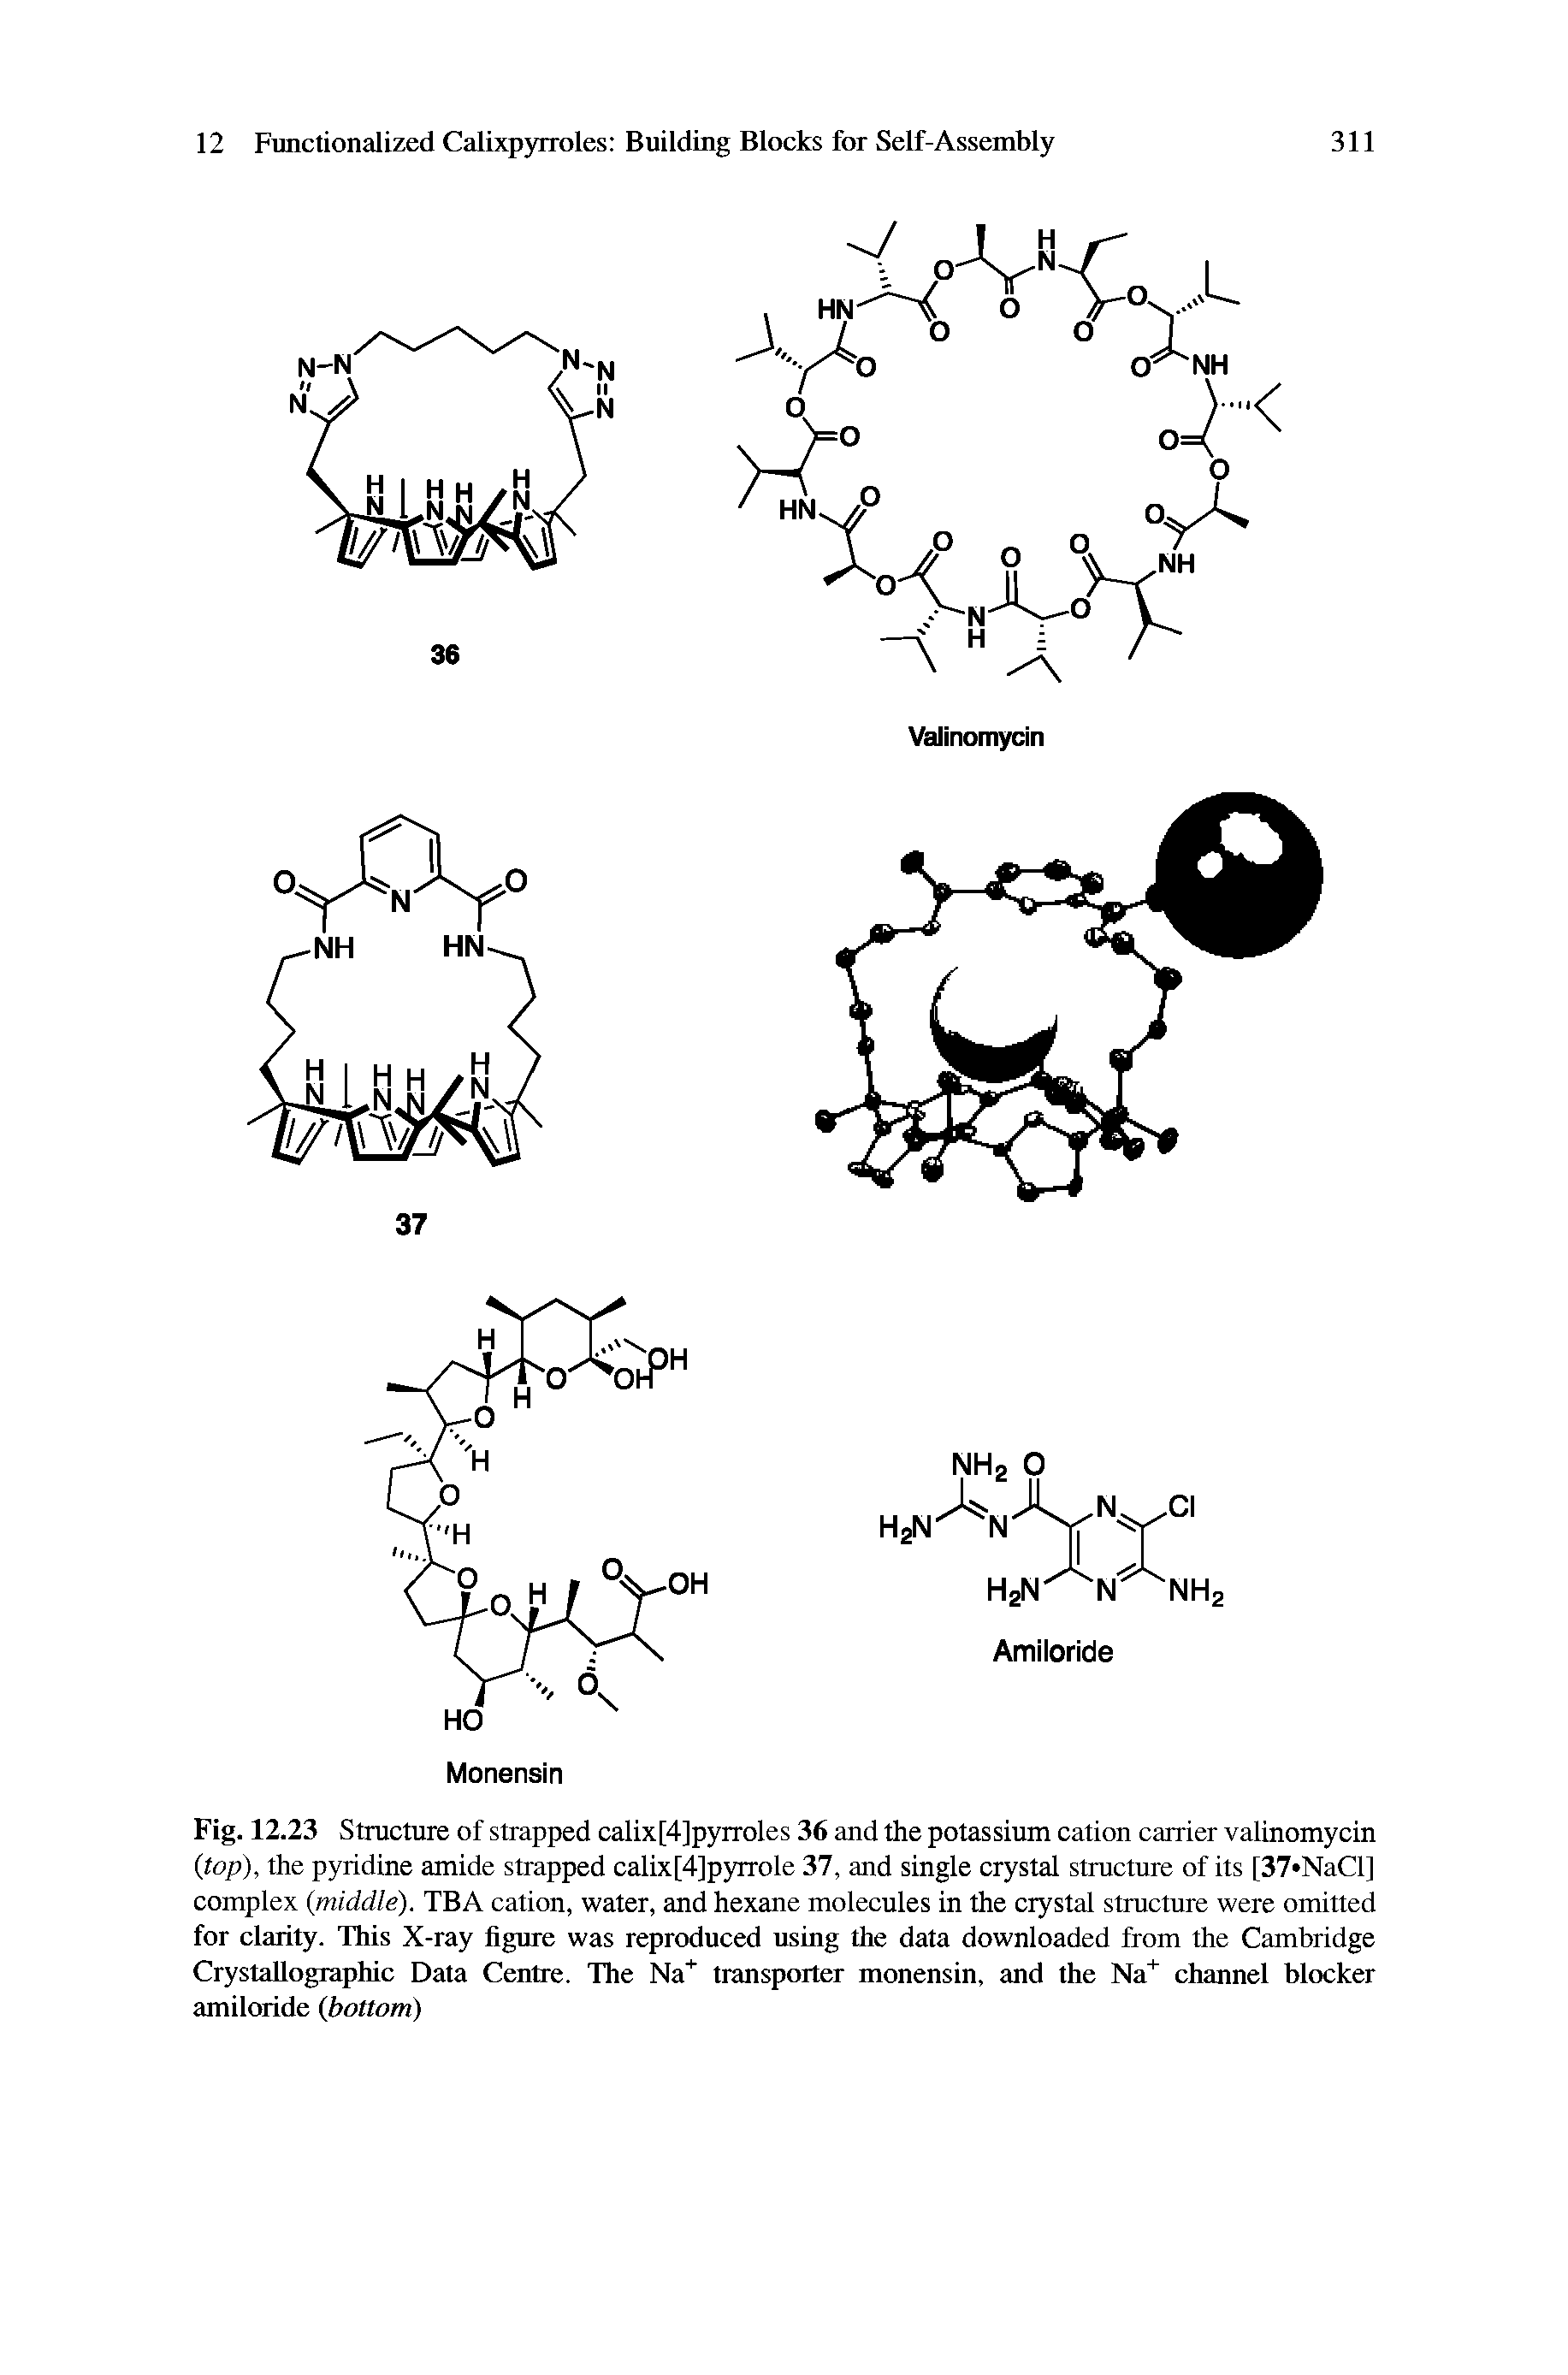 Fig. 12.23 Structure of strapped calix[4]pyrroles 36 and the potassium cation carrier valinomycin (top), the pyridine amide strapped calix[4]pyrrole 37, and single crystal structure of its [37 NaCl] complex (middle). TBA cation, water, and hexane molecules in the crystal structure were omitted for clarity. This X-ray figure was reproduced using the data downloaded from the Cambridge Crystallographic Data Centre. The Na transporter monensin, and the Na" channel blocker amiloride (bottom)...